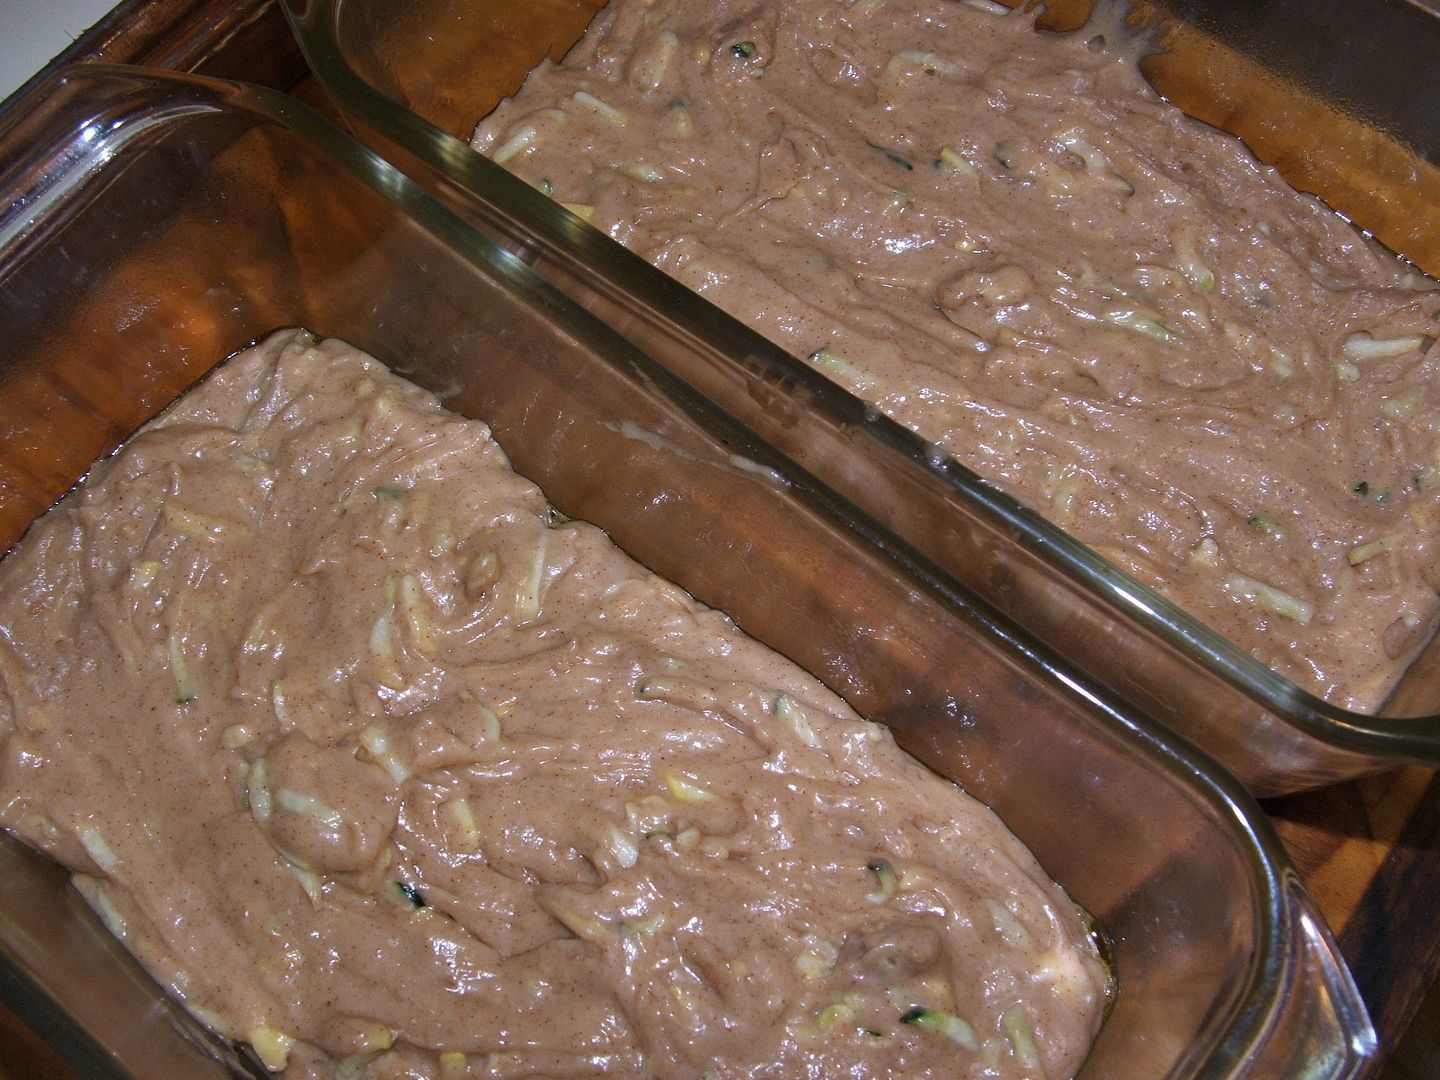 Applesauce Zucchini Bread by Angie Ouellette-Tower for godsgrowinggarden.com photo 002_zps34dd0d43.jpg